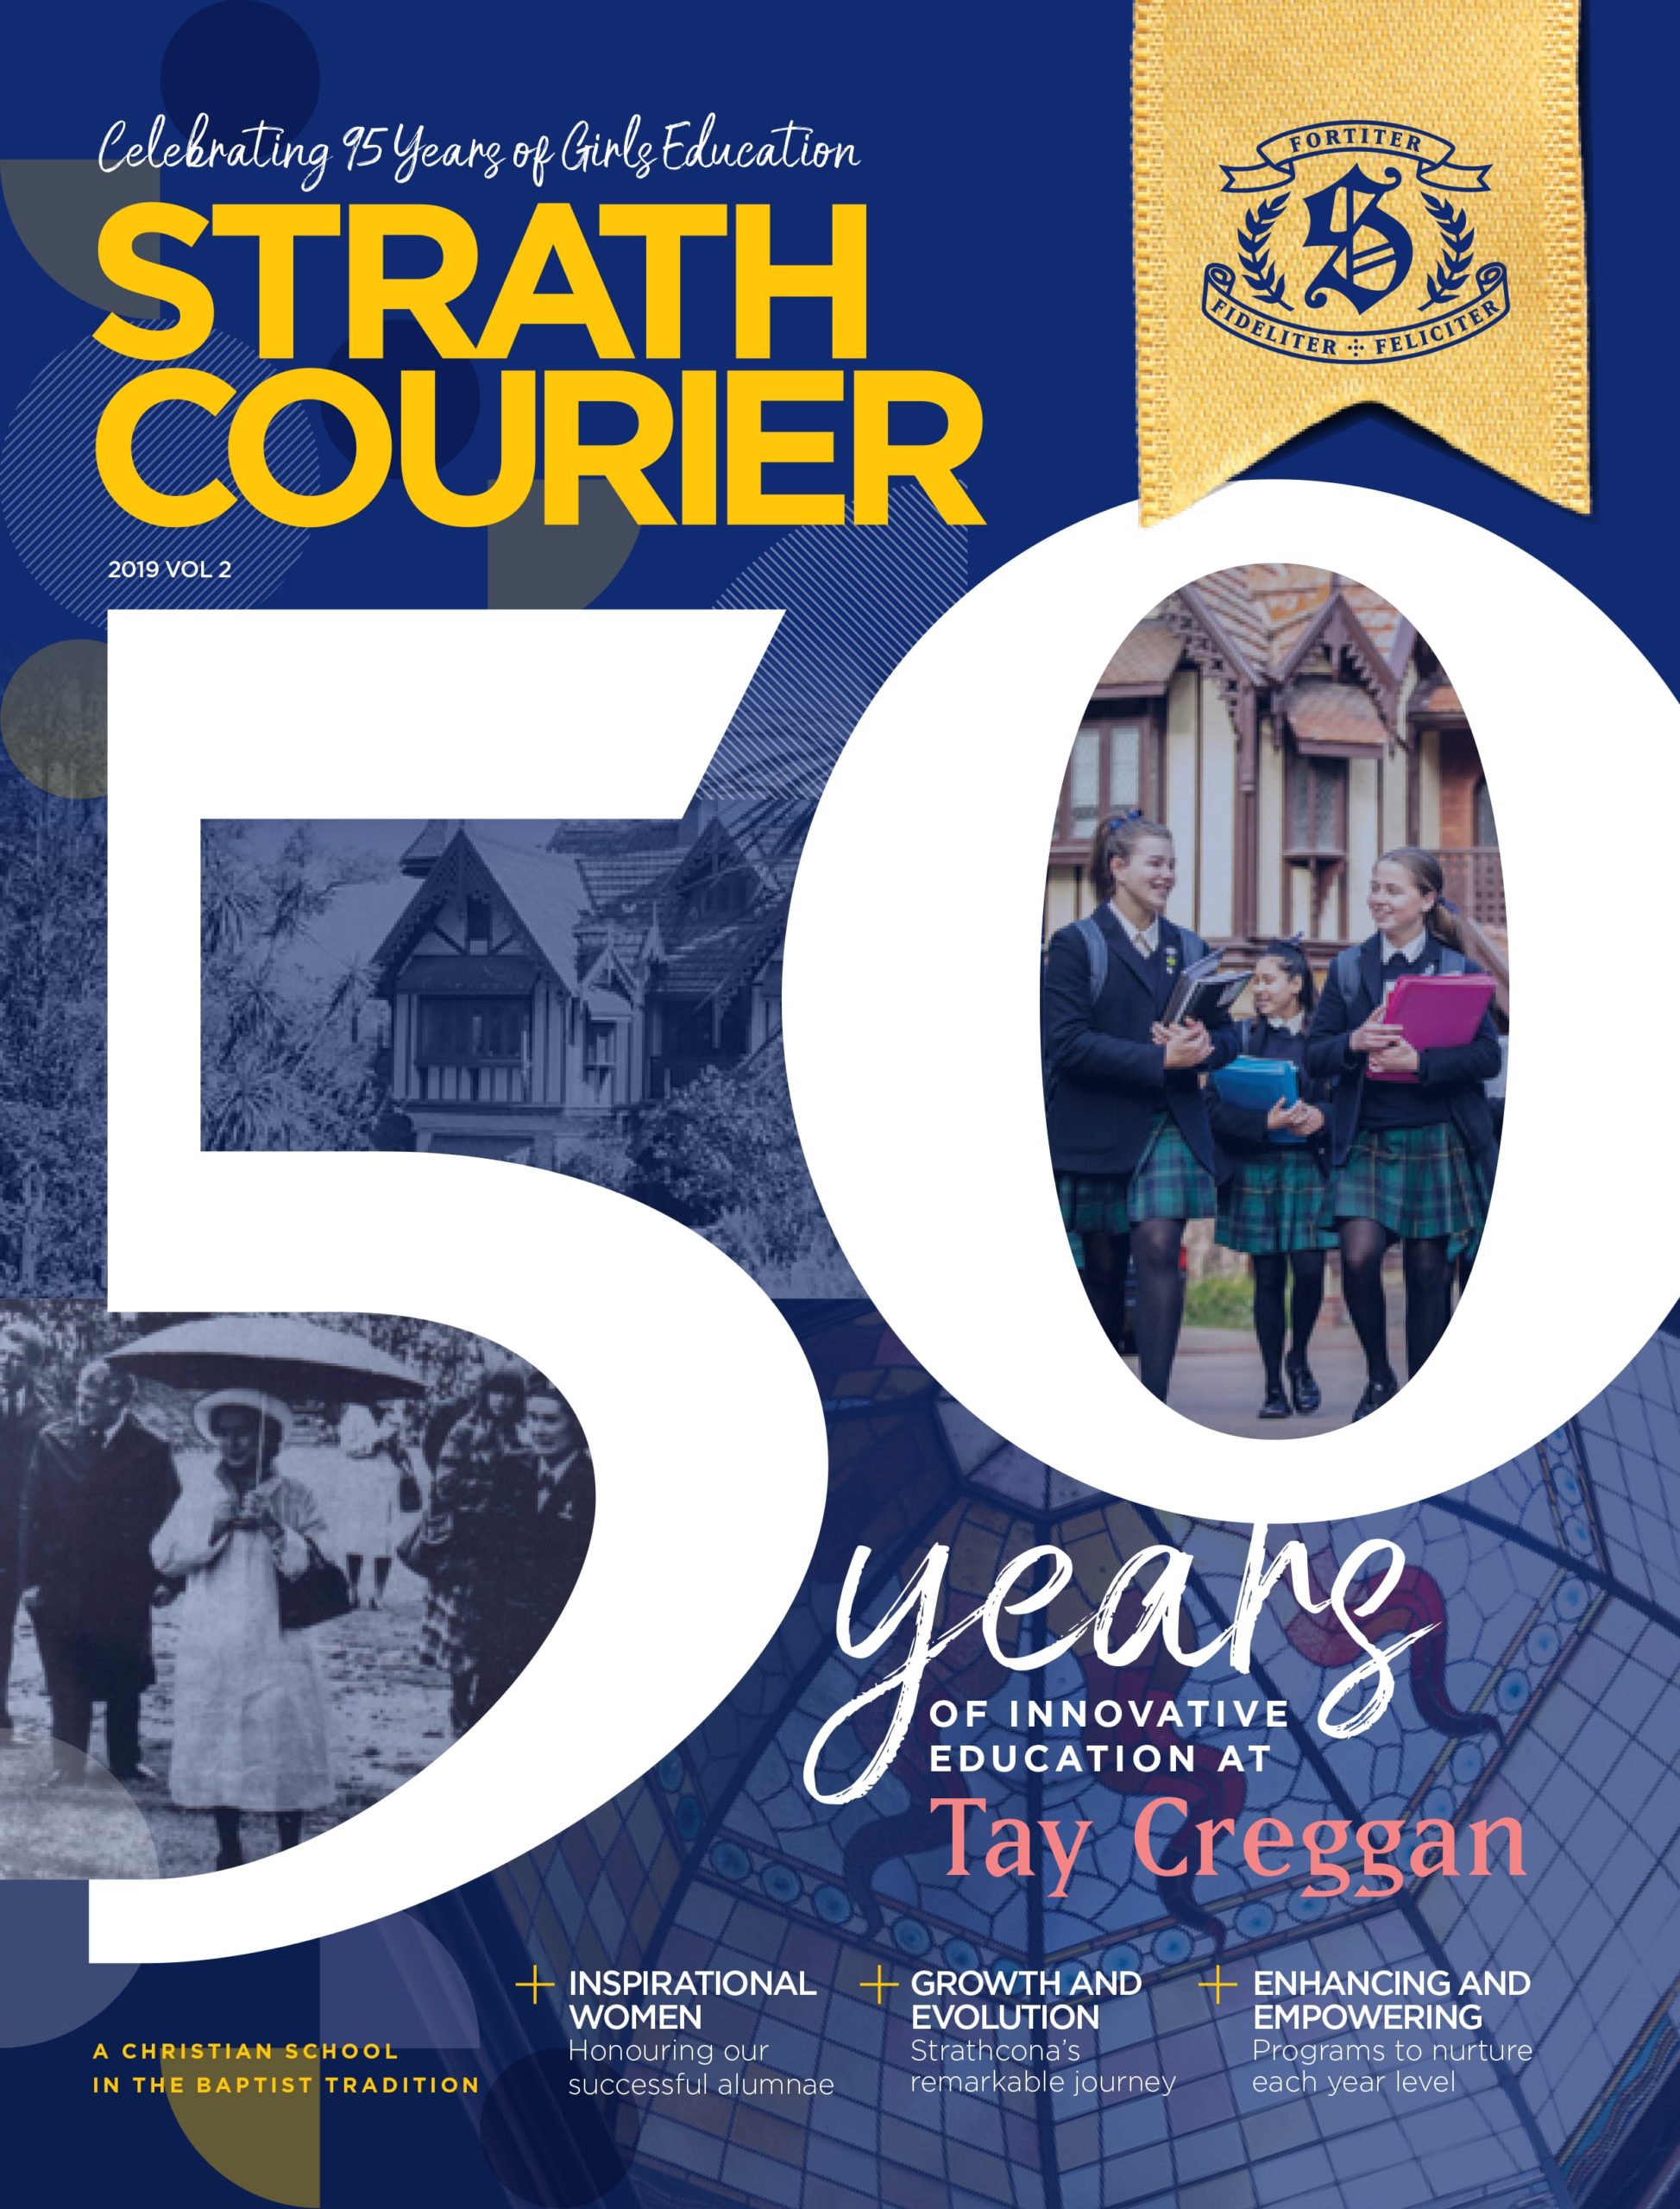 Strath Courier 50 years